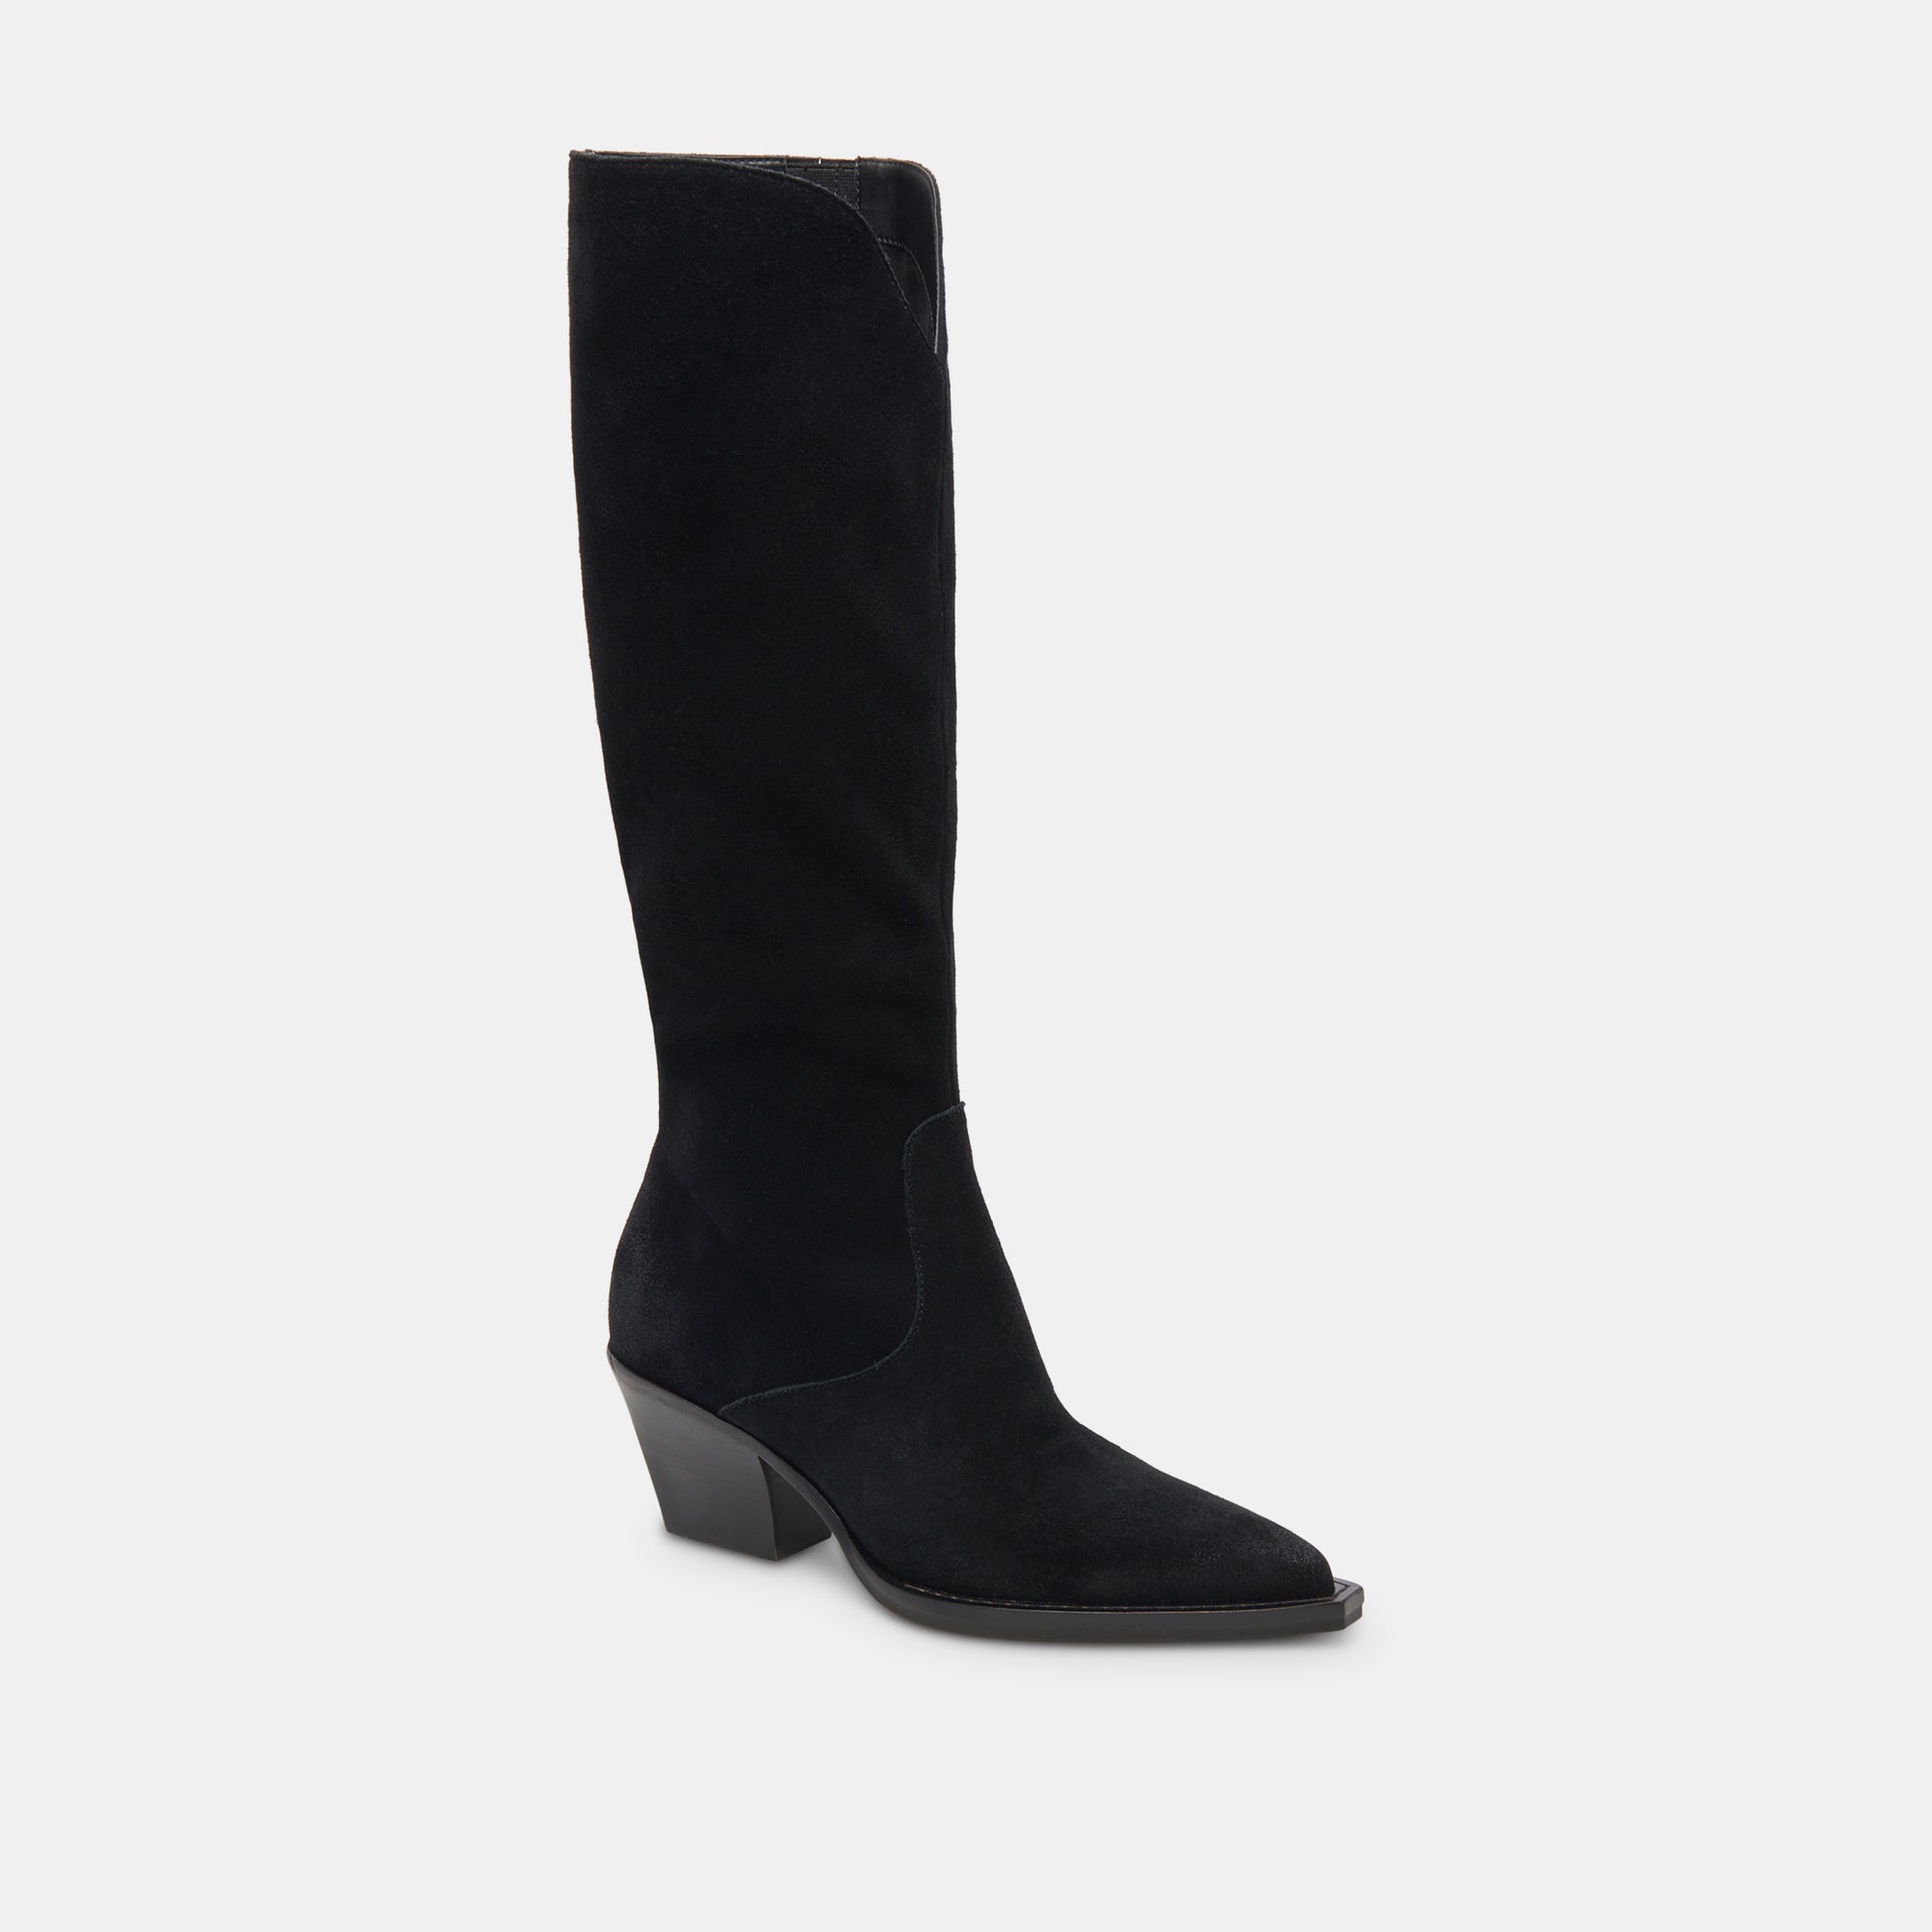 Raj Boots in Onyx Suede | Women's Onyx Suede Knee-High Boots – Dolce Vita